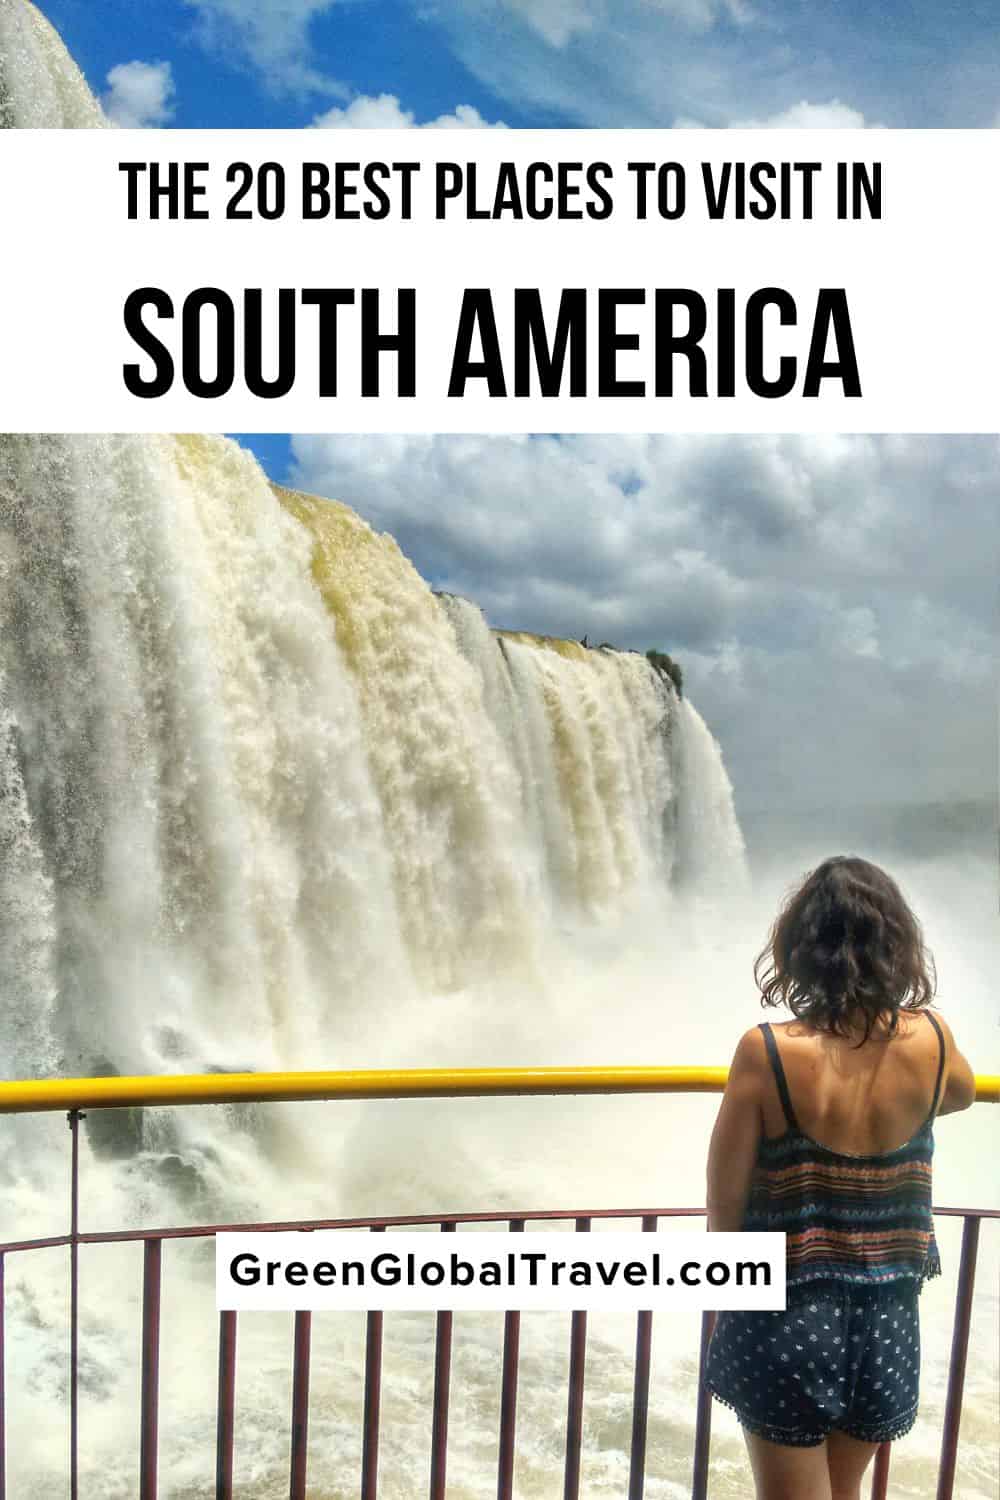 The 20 Best places to visit in South America including rainforests, wetlands, mountains and waterfalls for your next ecotourism adventure. | best countries to visit south america | places in south america | best places to travel in south america | best cities in south america | south america tourist attractions | best south american country to visit | best places in south america | south america places to visit | best cities to visit in south america | south american places to visit |